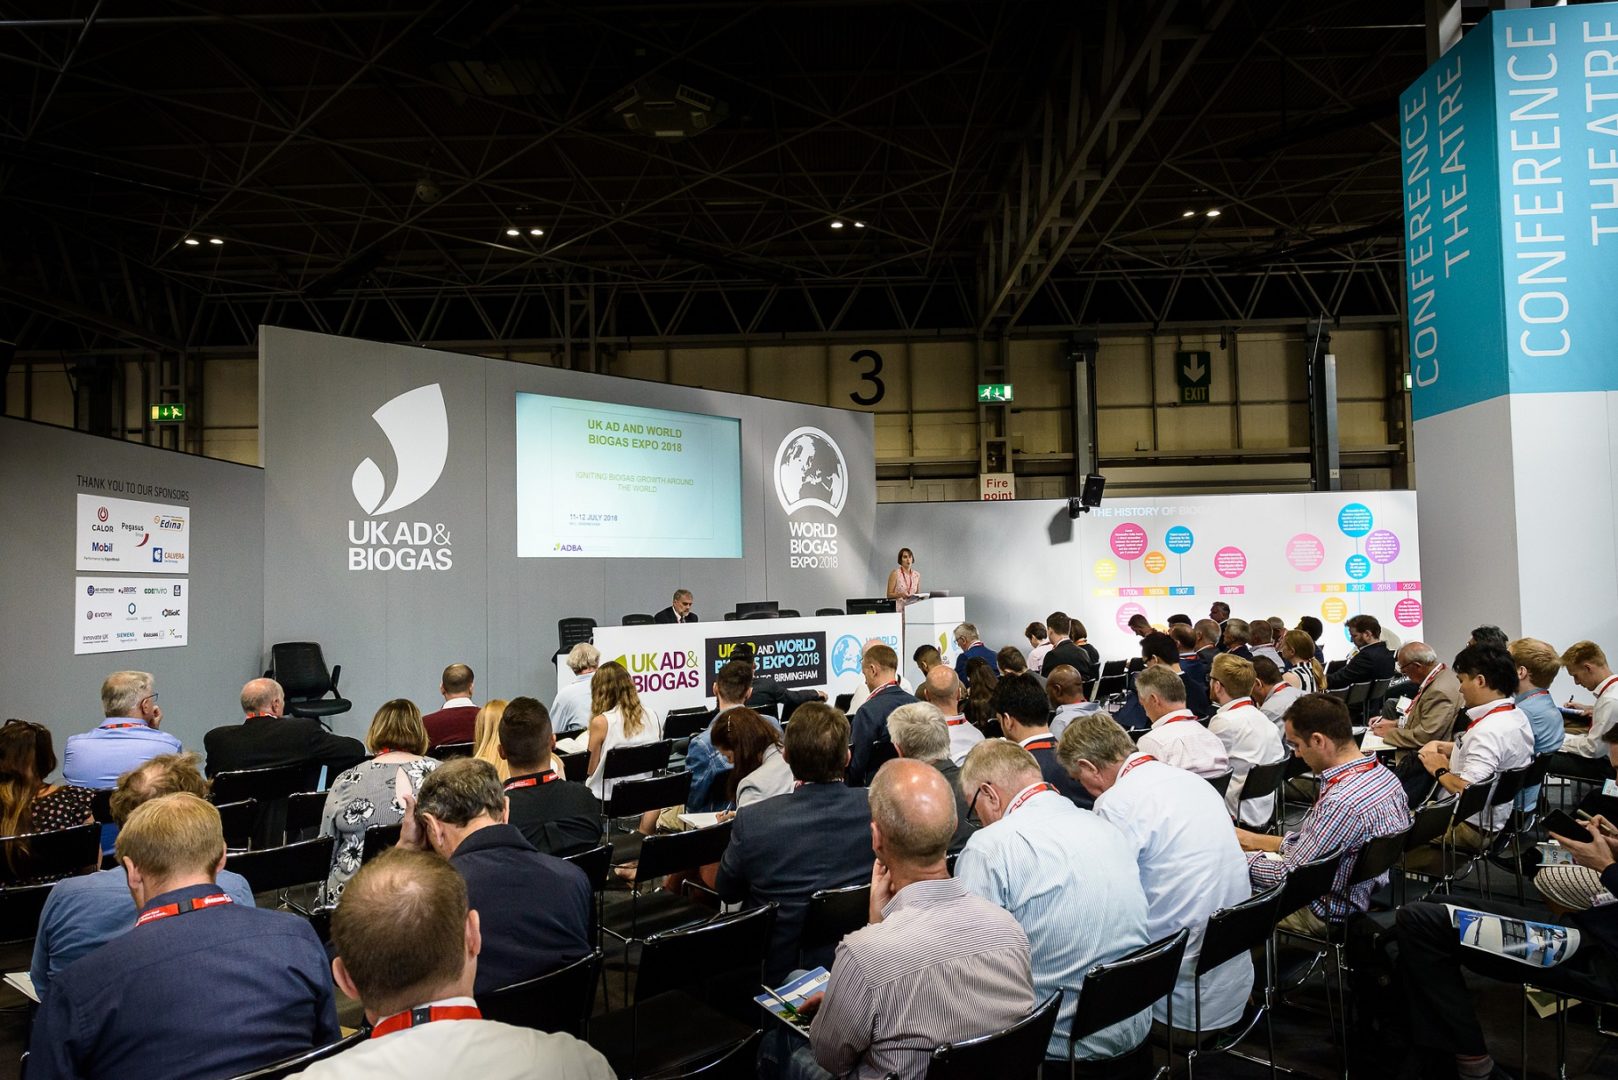 World Biogas Summit to put biogas “at the heart of sustainable